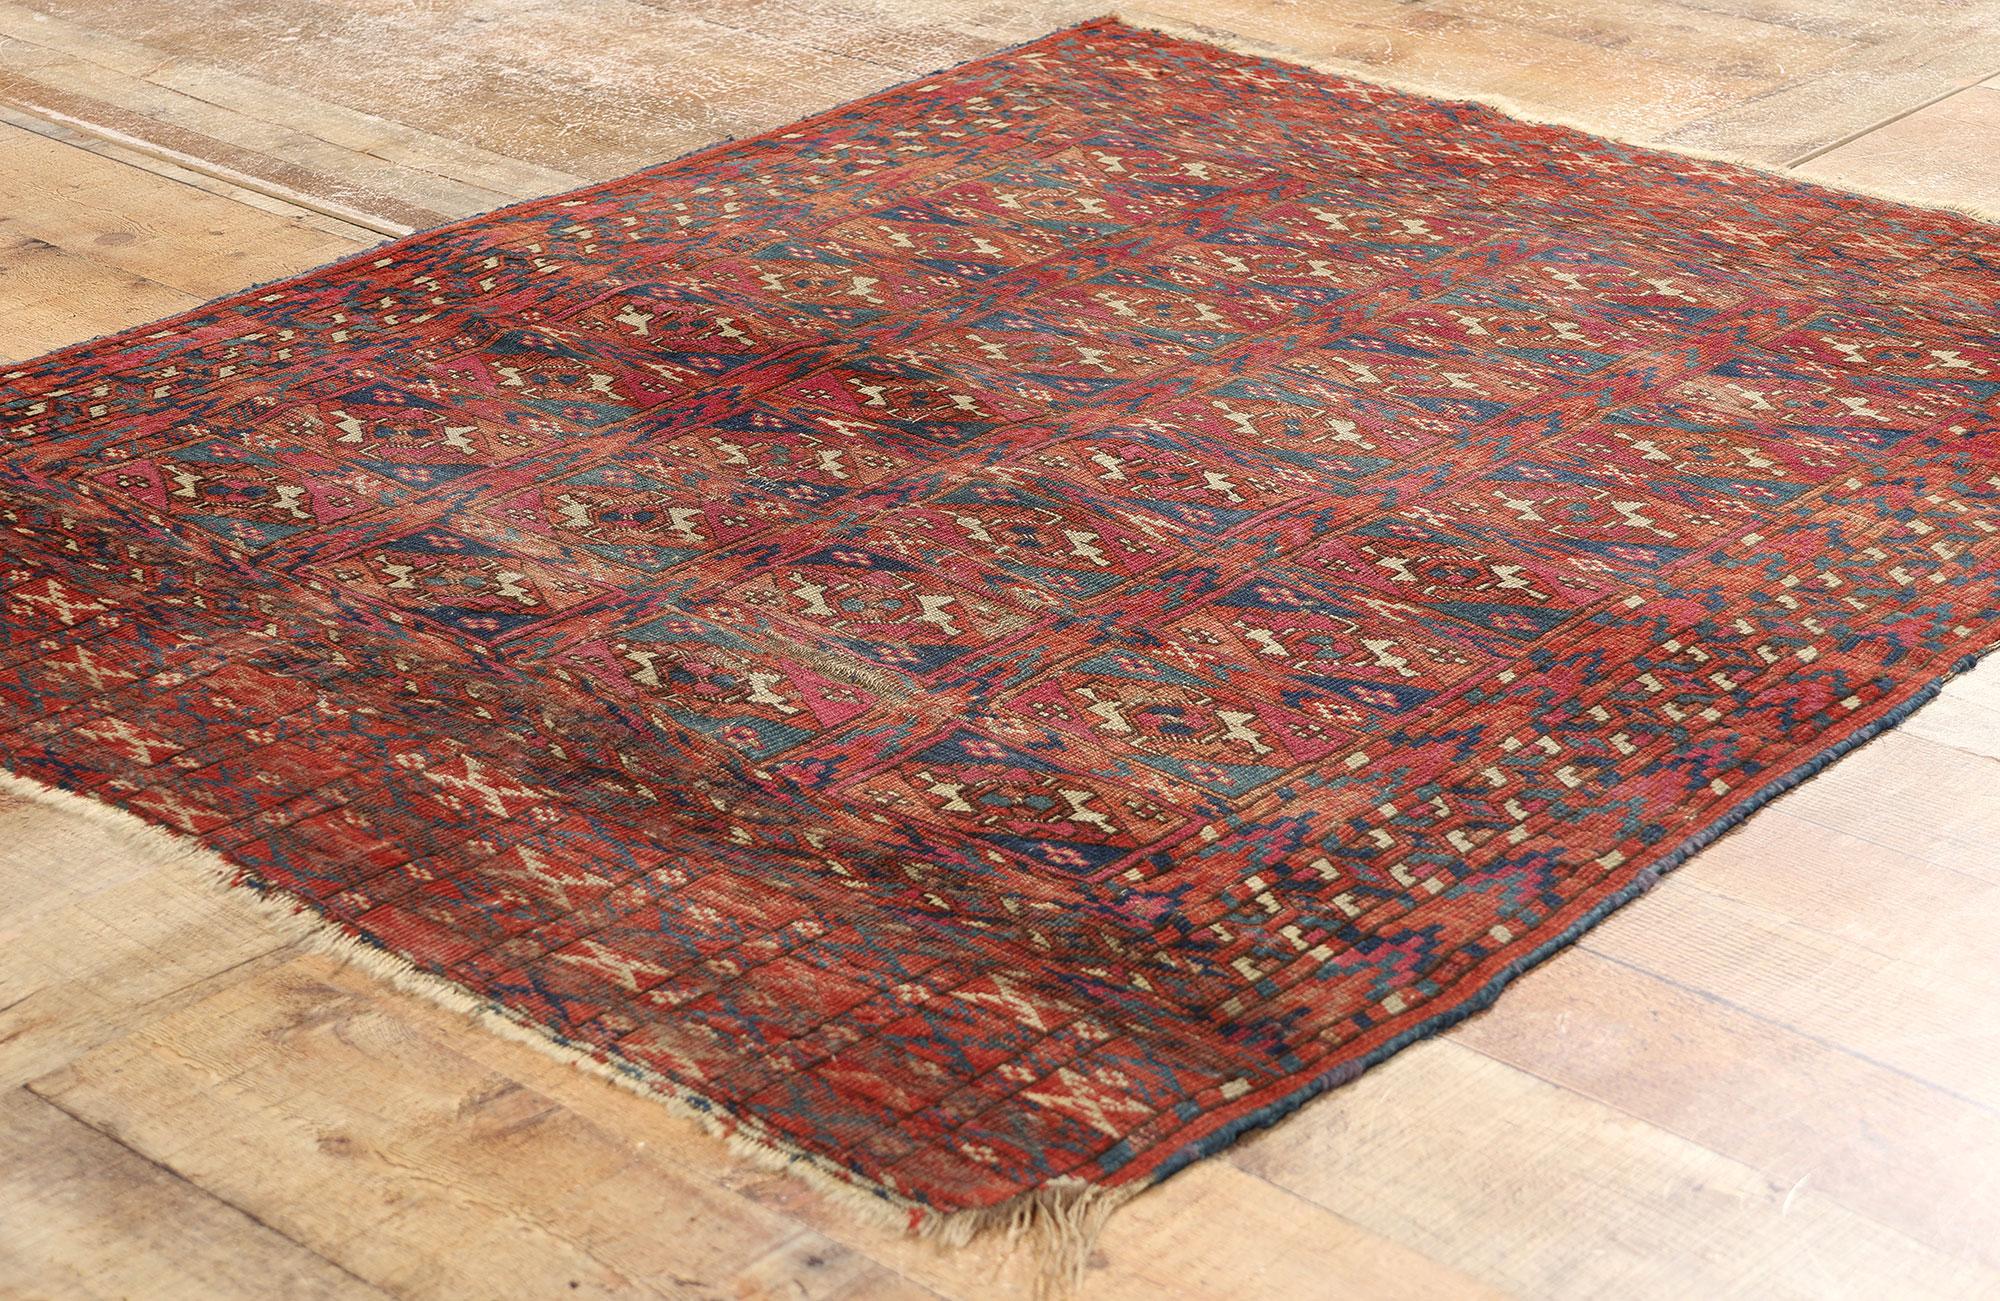 Late 19th Century Distressed Antique Turkoman Tribe Chuval Tekke Tribal Carpet  For Sale 1